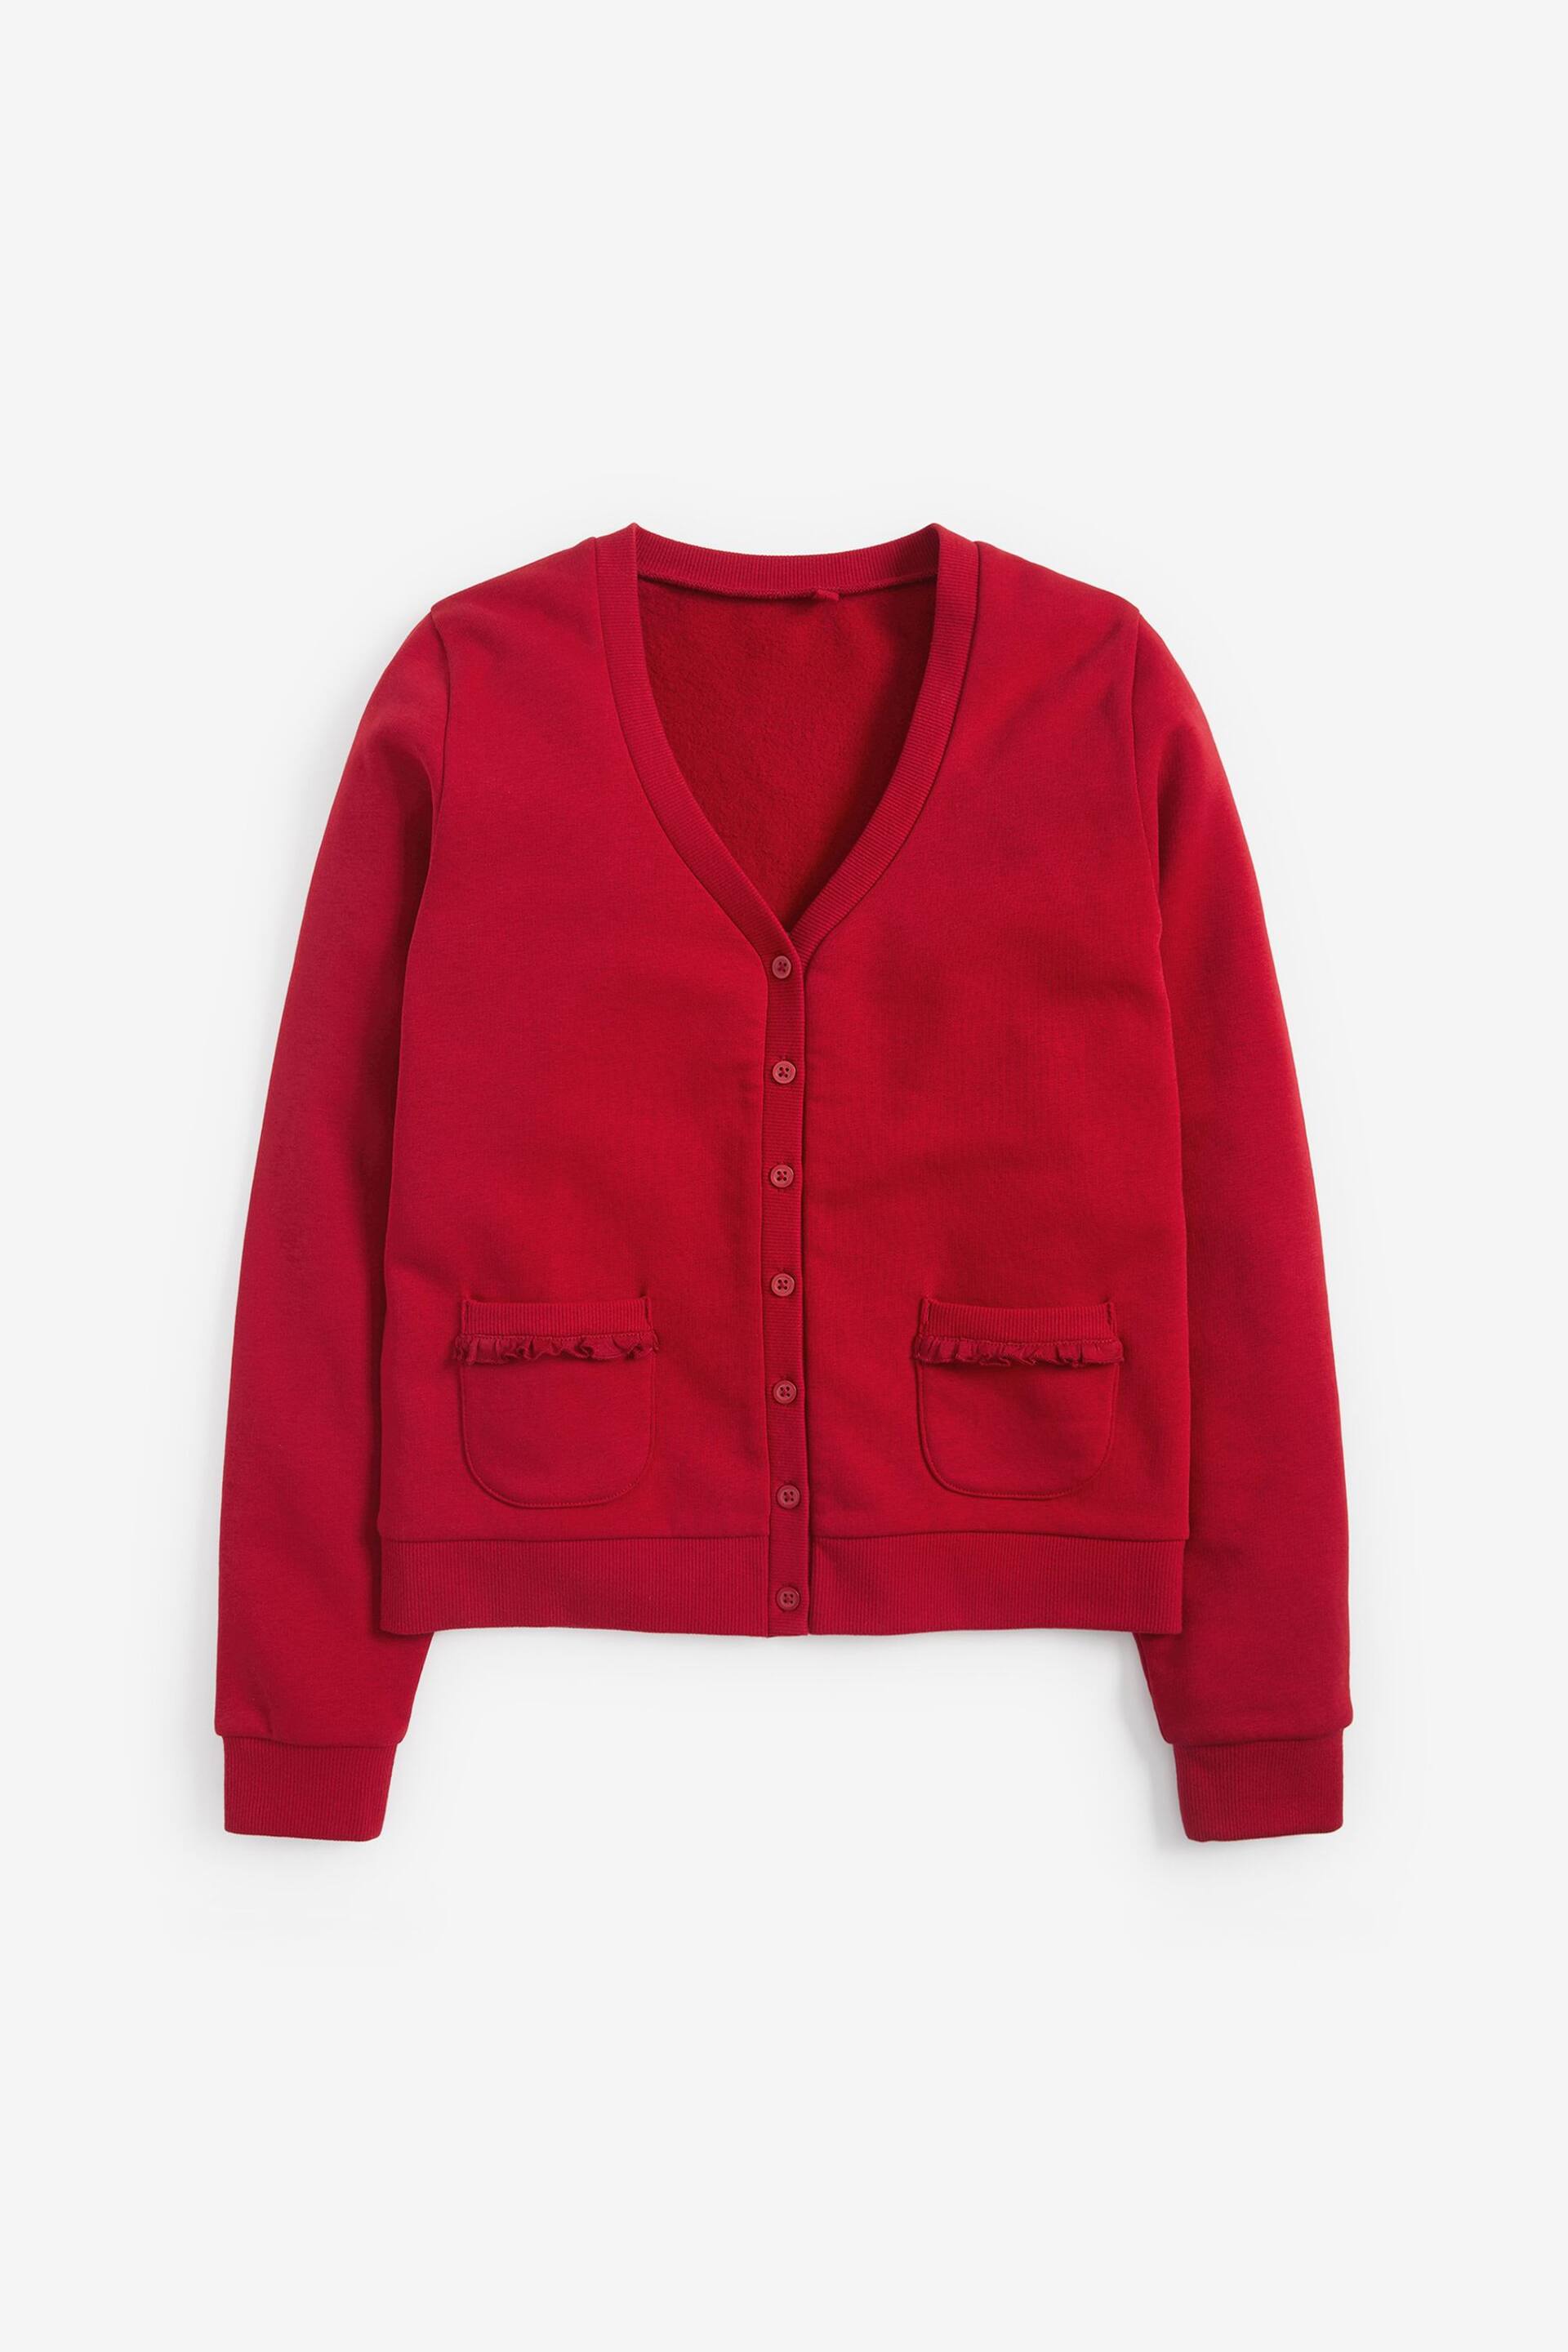 Red Cotton Rich Frill Pocket Jersey School Cardigan (3-16yrs) - Image 5 of 7